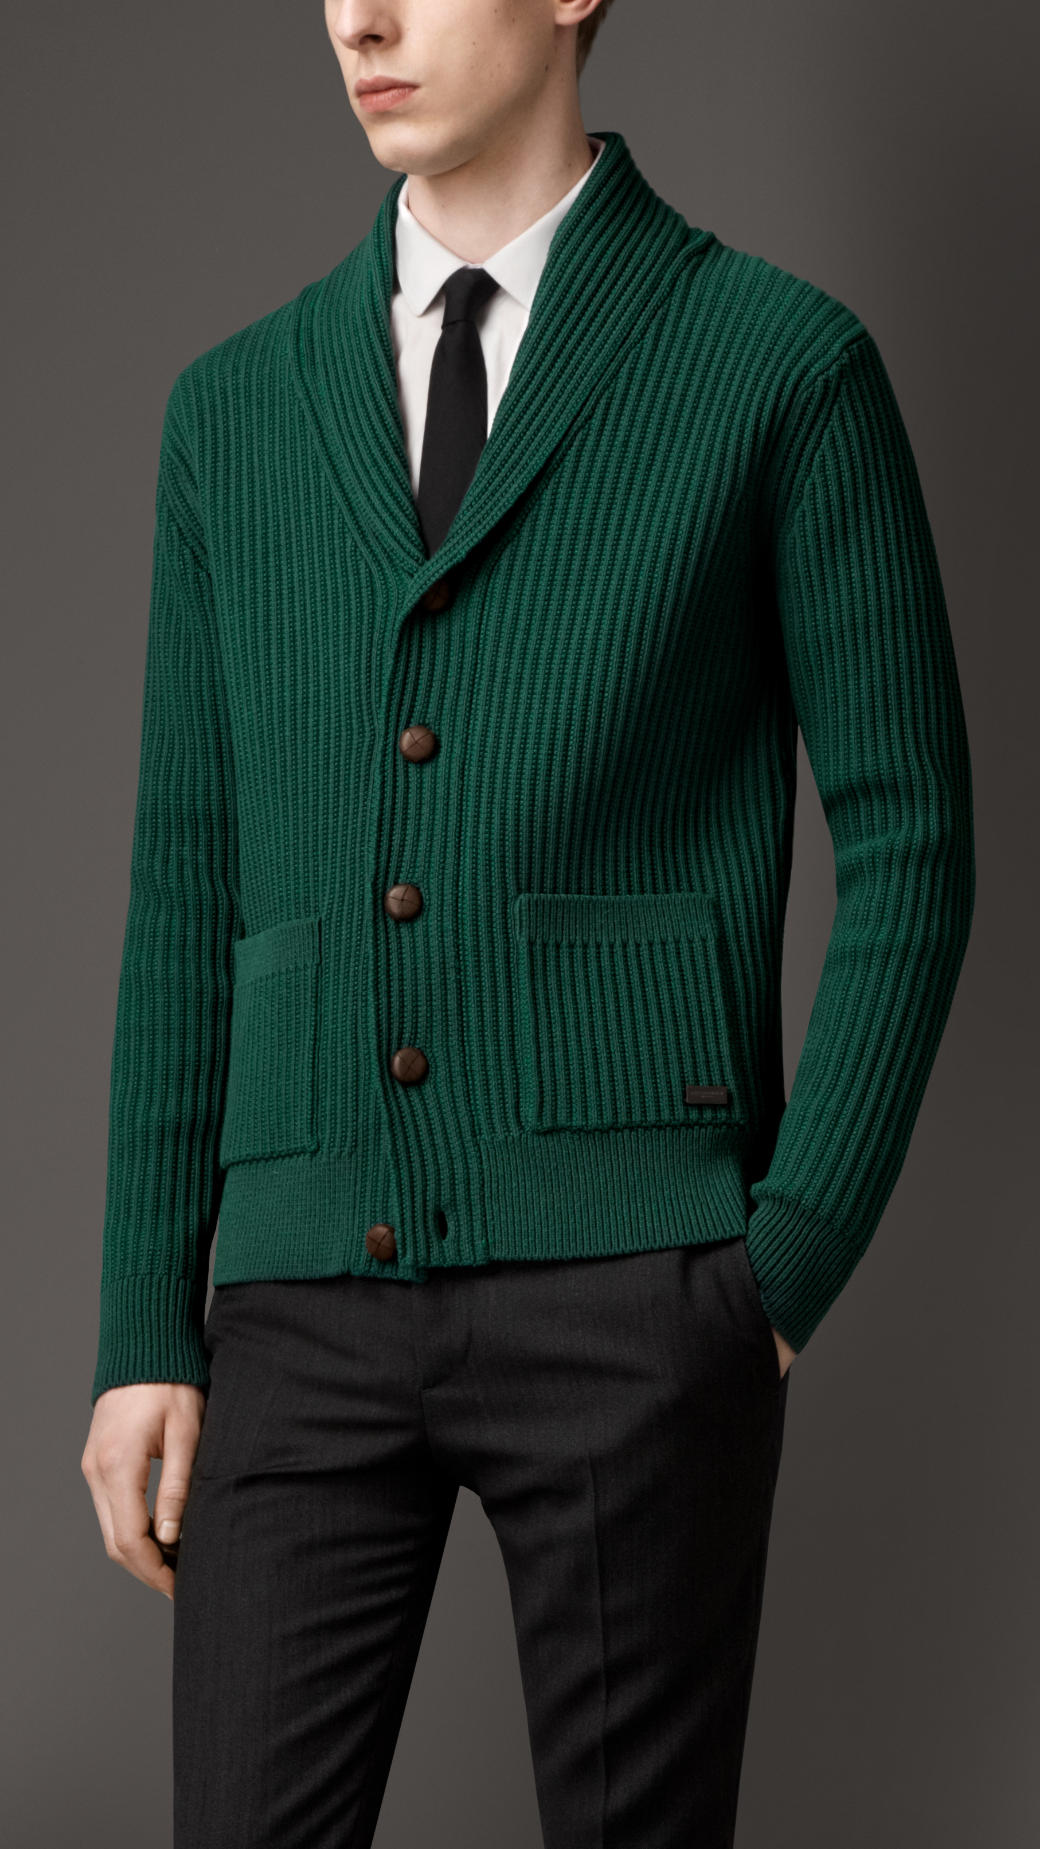 Burberry Dark Racing Green Knitted Cotton Blend Cardigan Jacket Product 1 12295071 564199947 